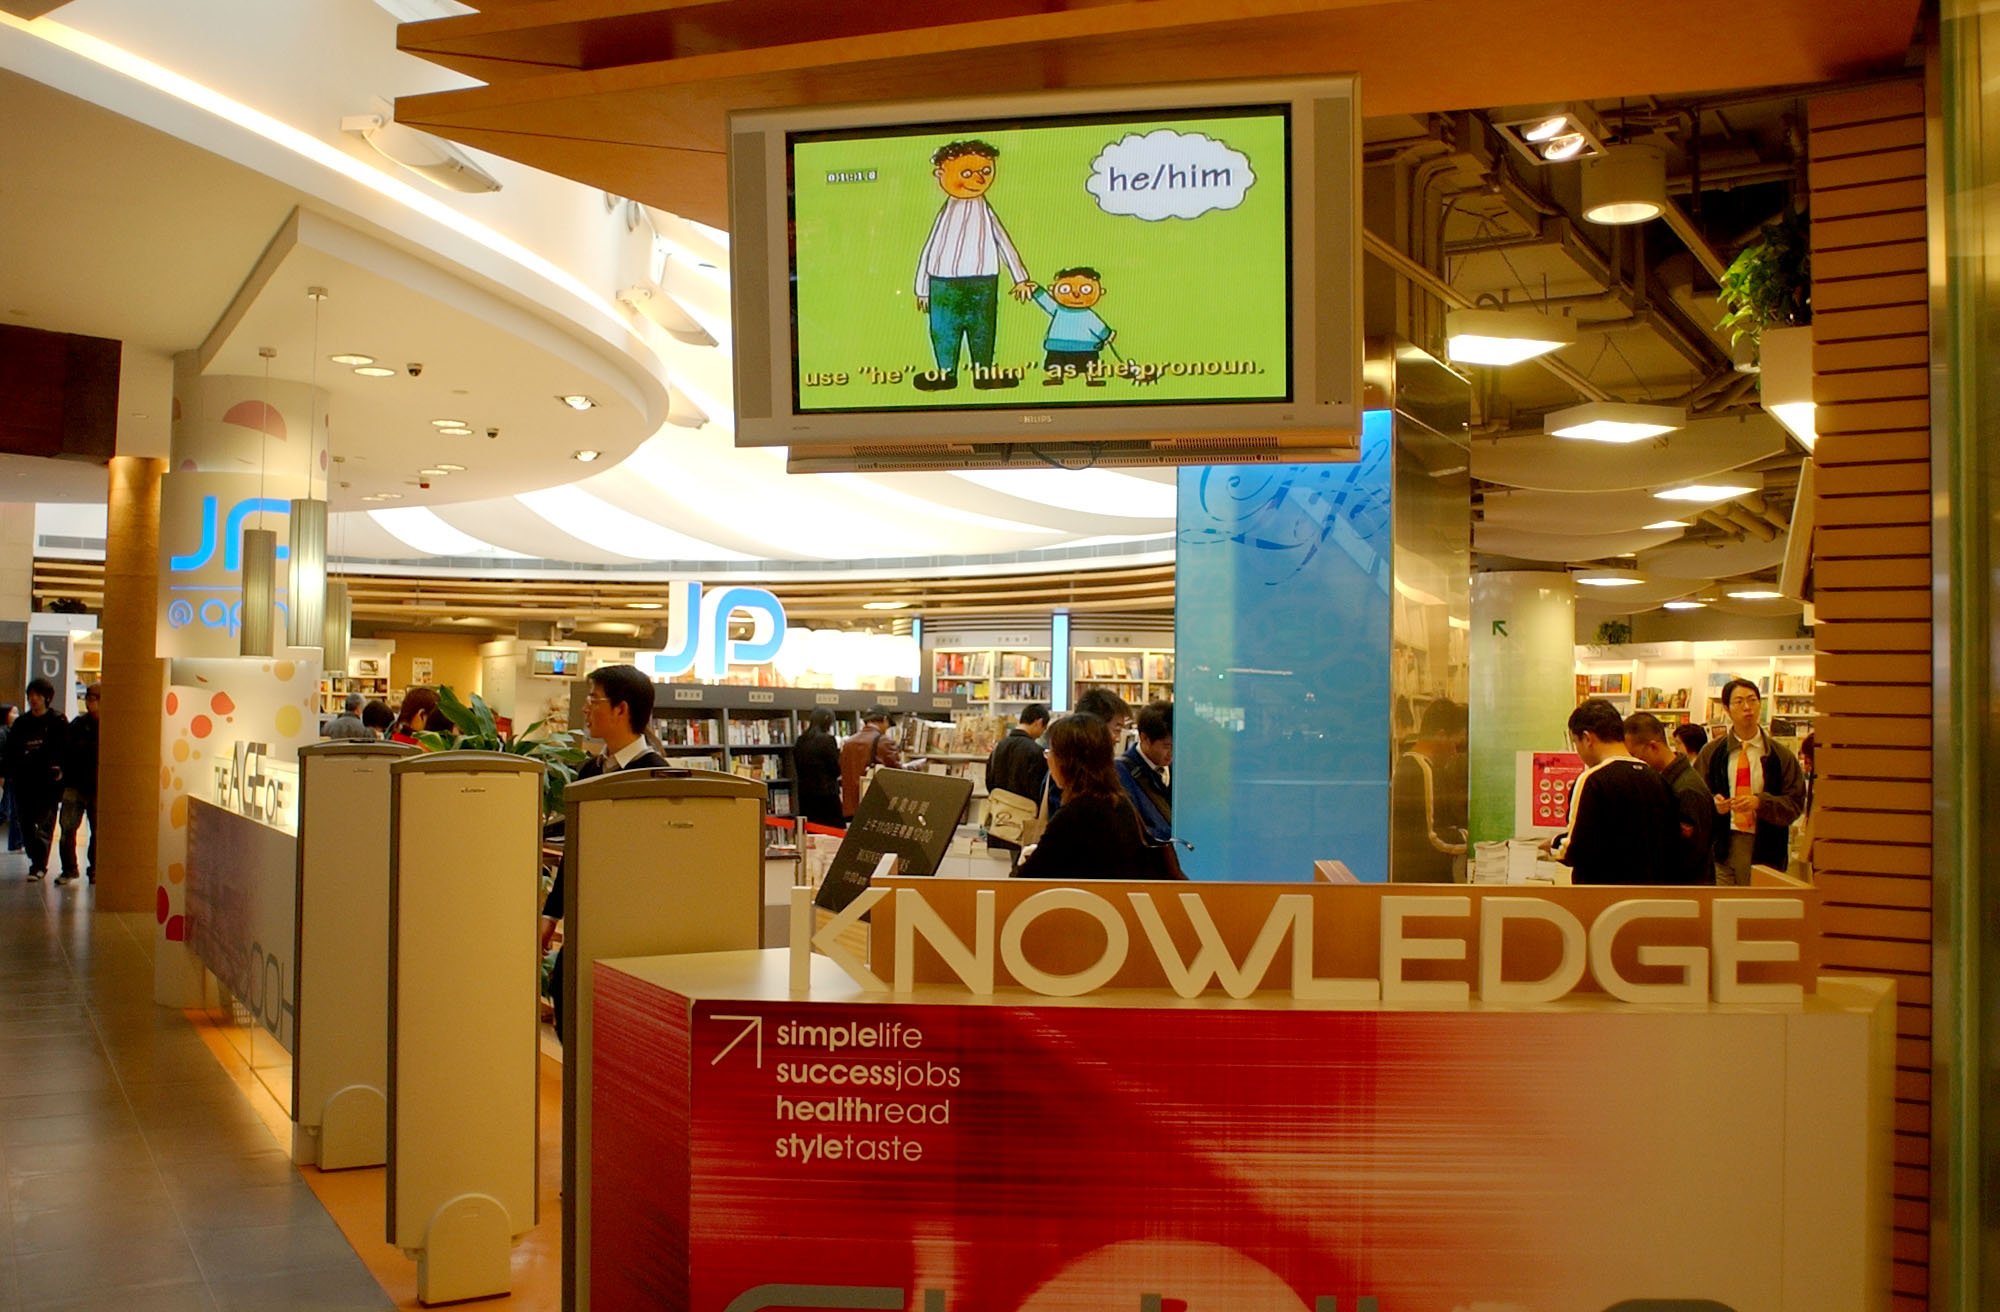 Public English lessons are at a Kwun Tong shopping mall. Photo: Steve Cray